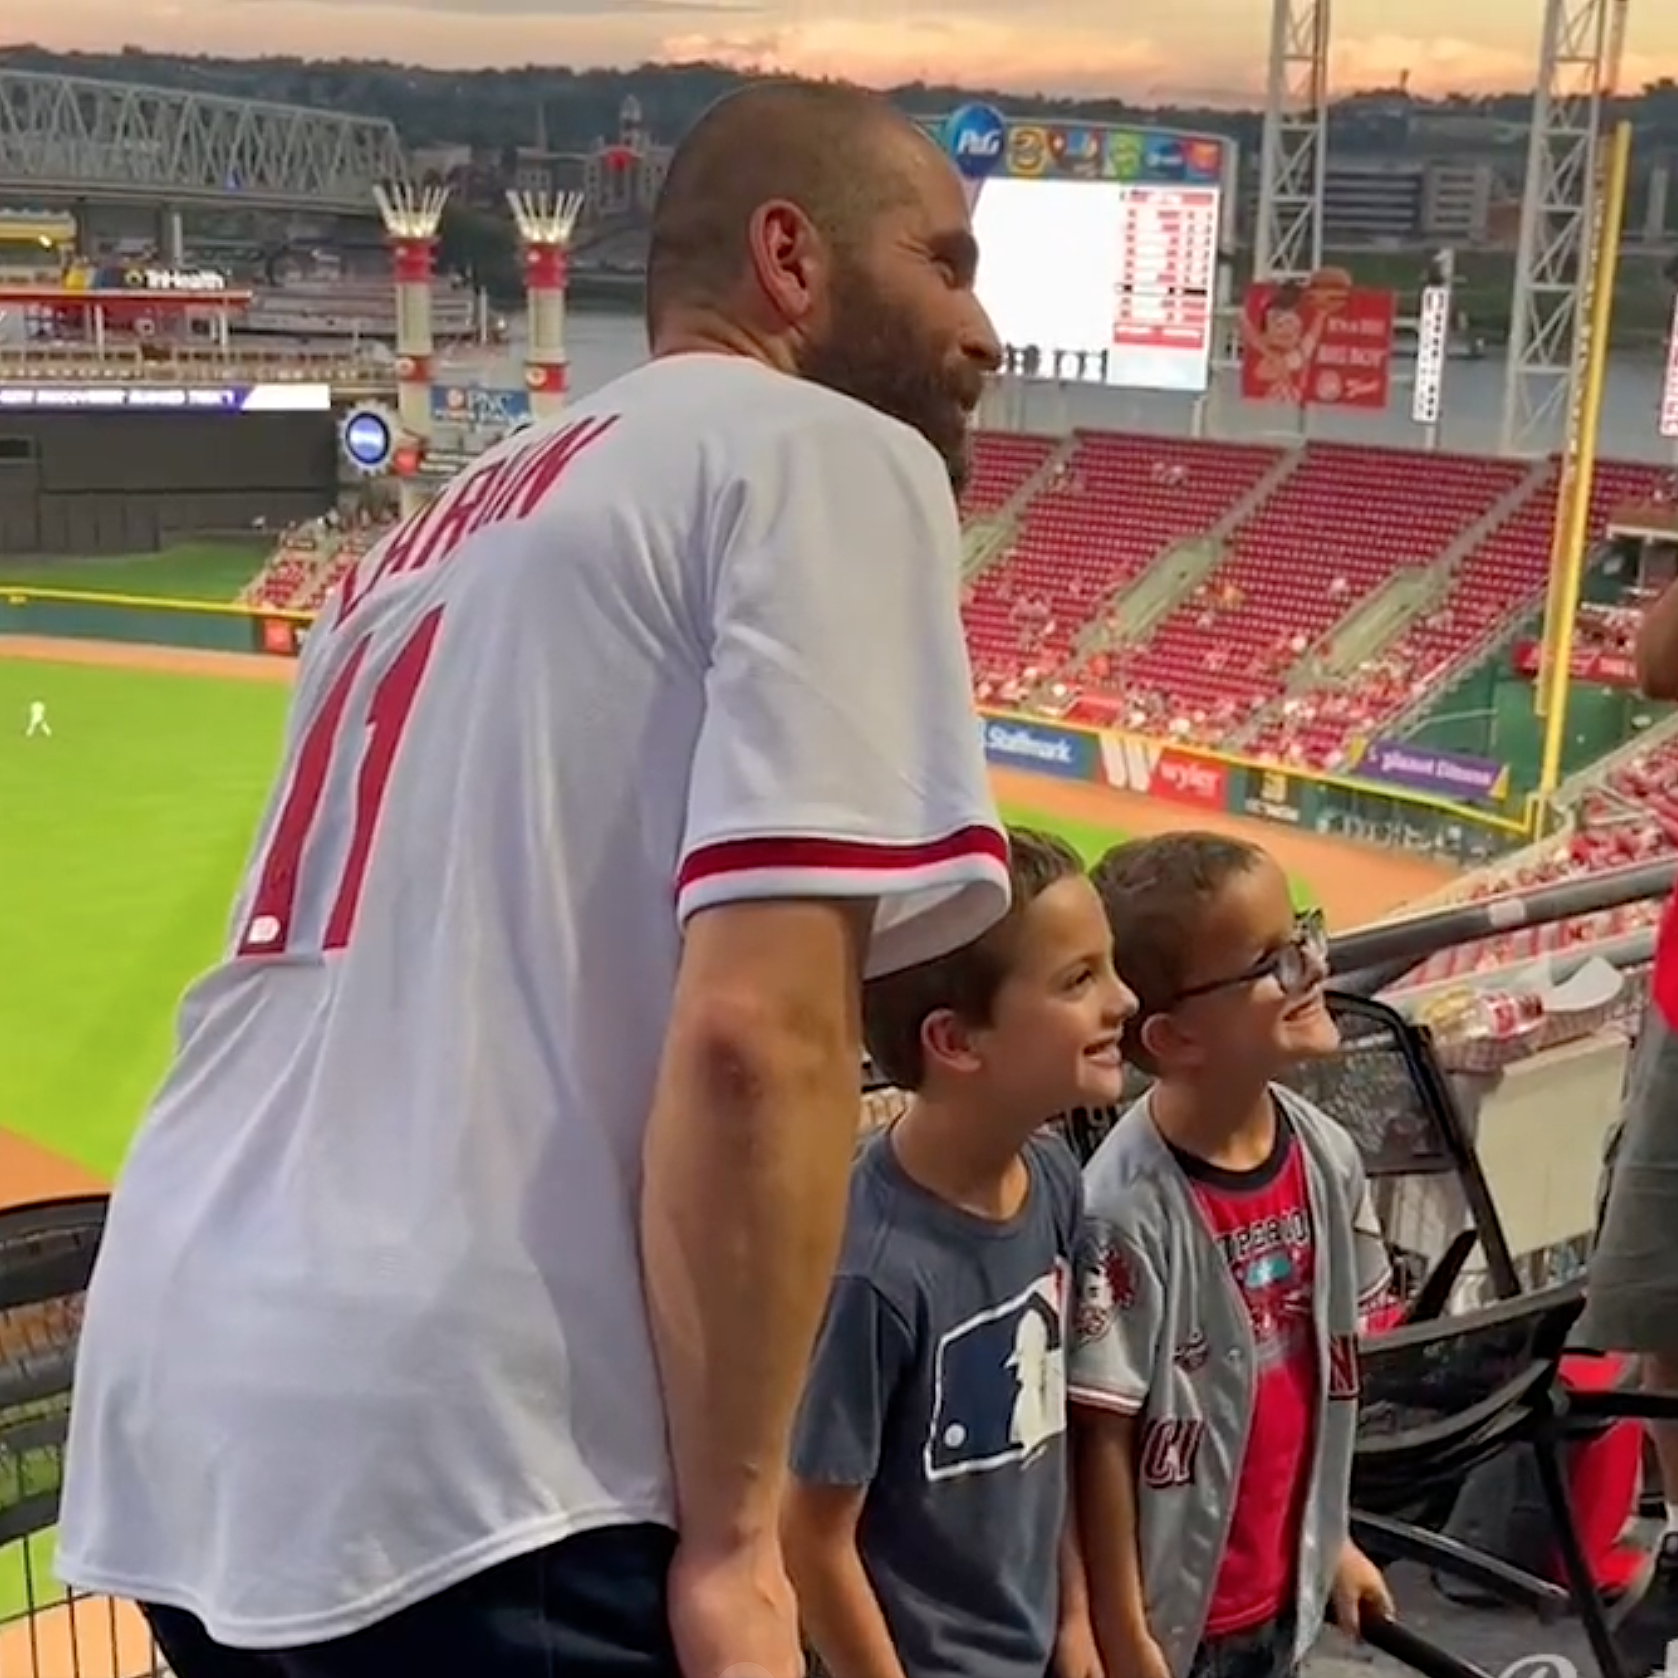 Joey Votto hanging out in the stands with Reds fans while out with